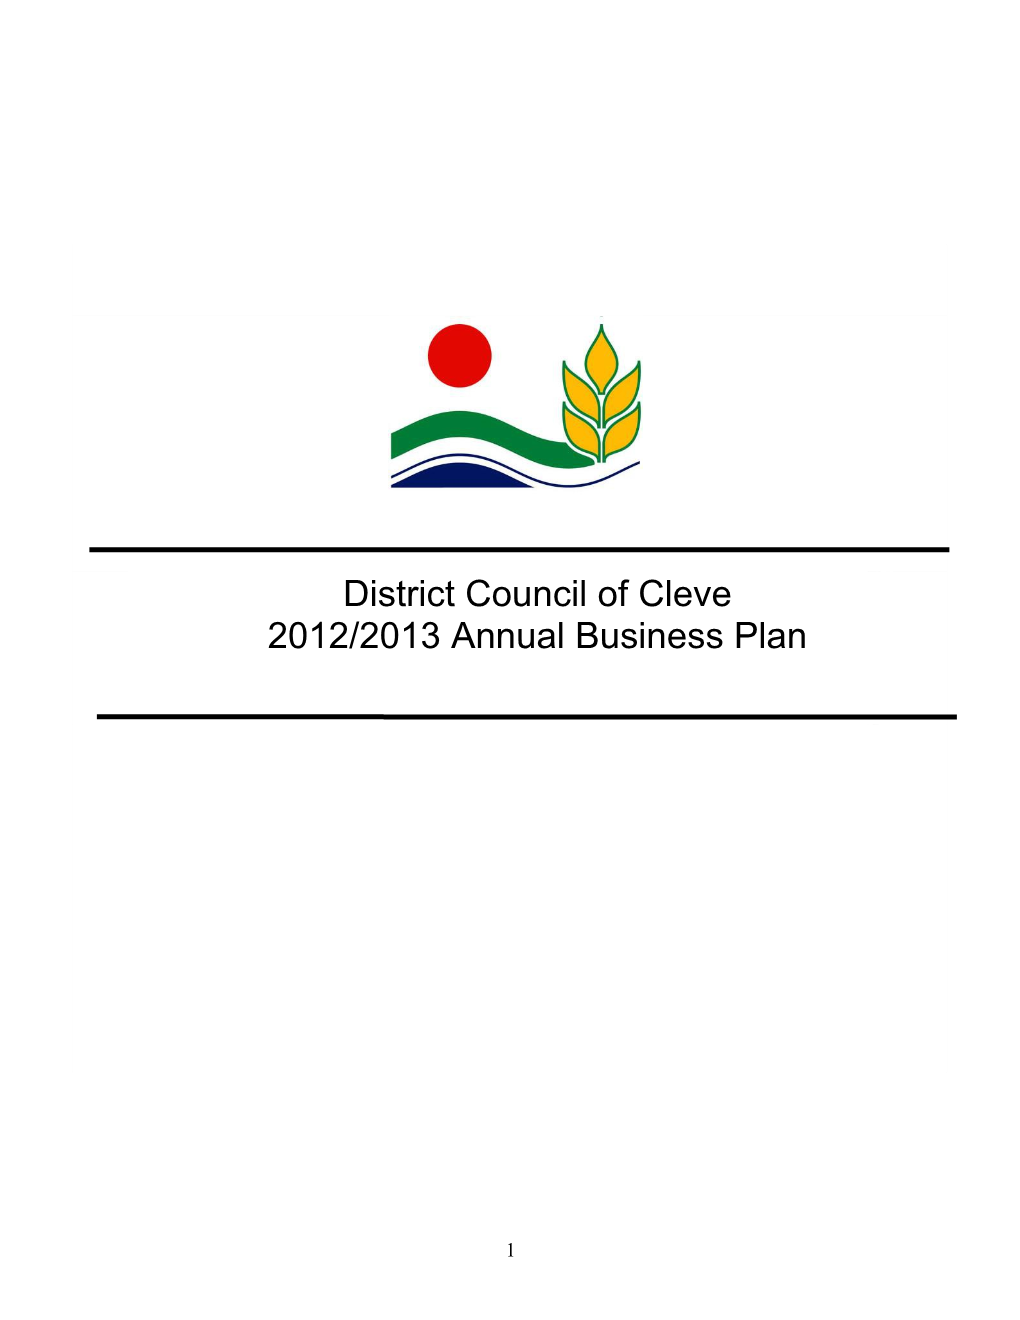 What Is an Annual Business Plan?